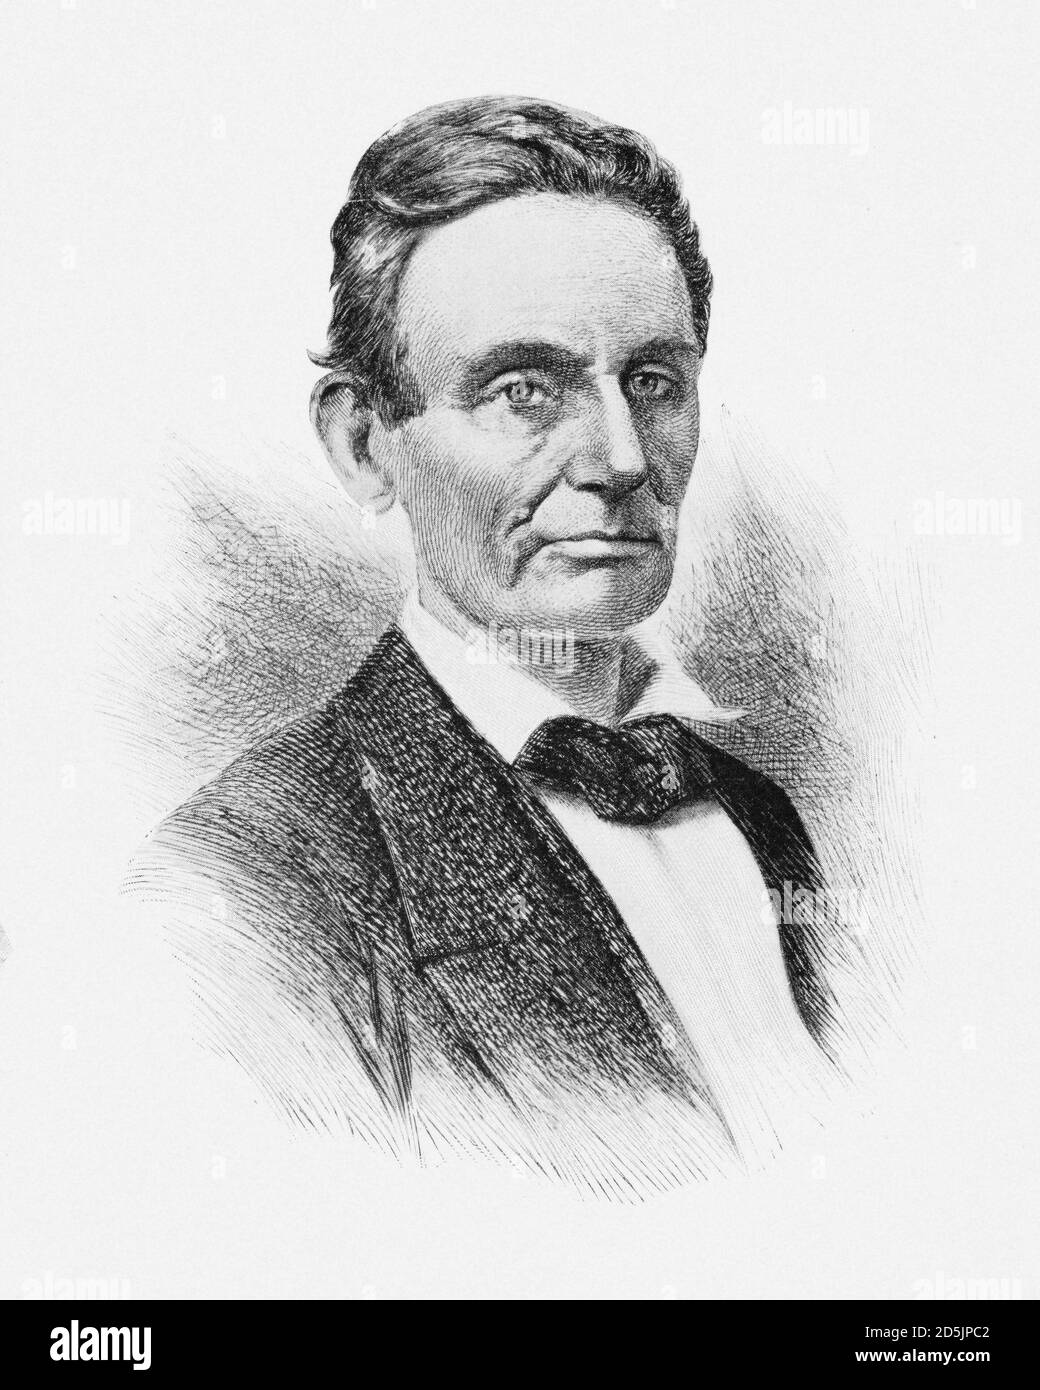 Portrait of president Abraham Lincoln. Abraham Lincoln (1809 – 1865) was an American statesman and lawyer who served as the 16th president of the Unit Stock Photo